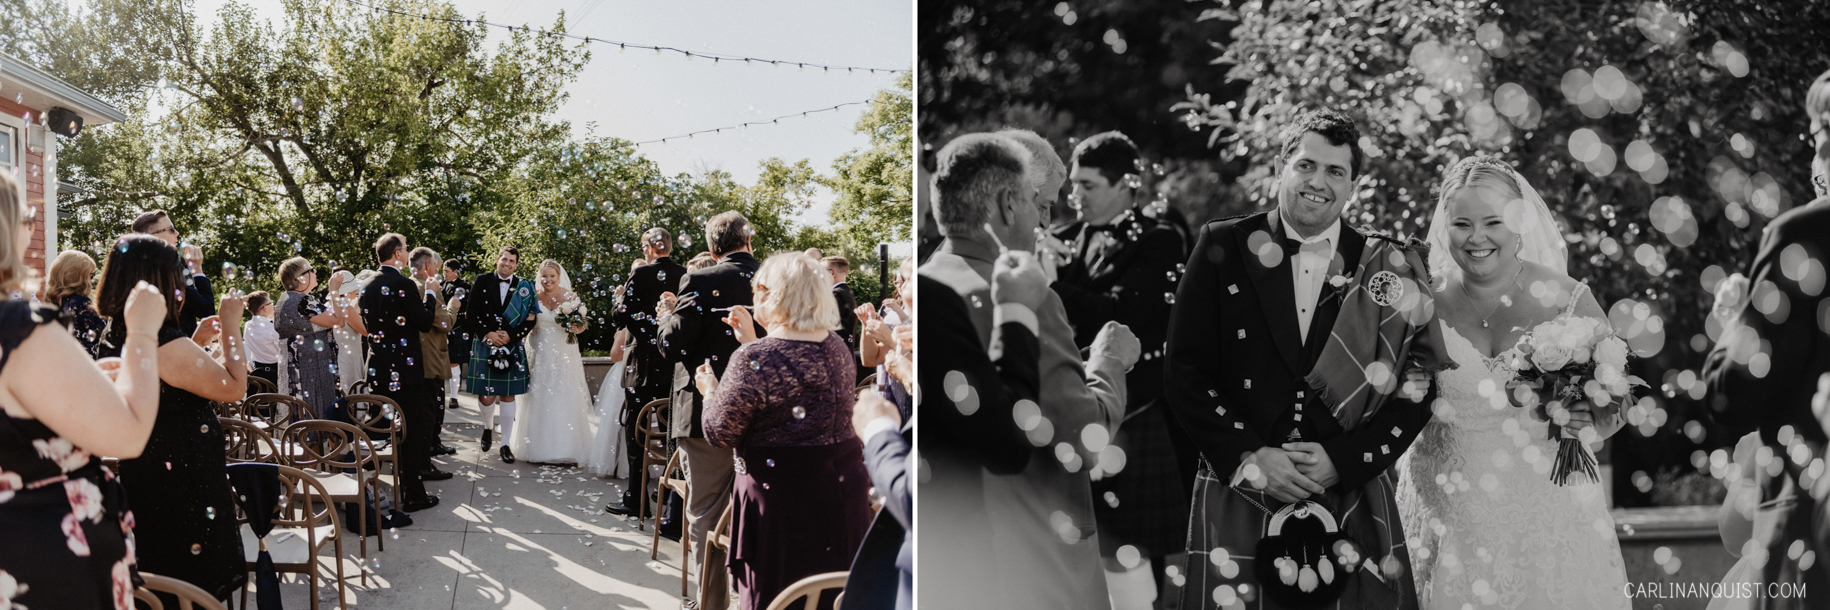 Recessional with Bubbles